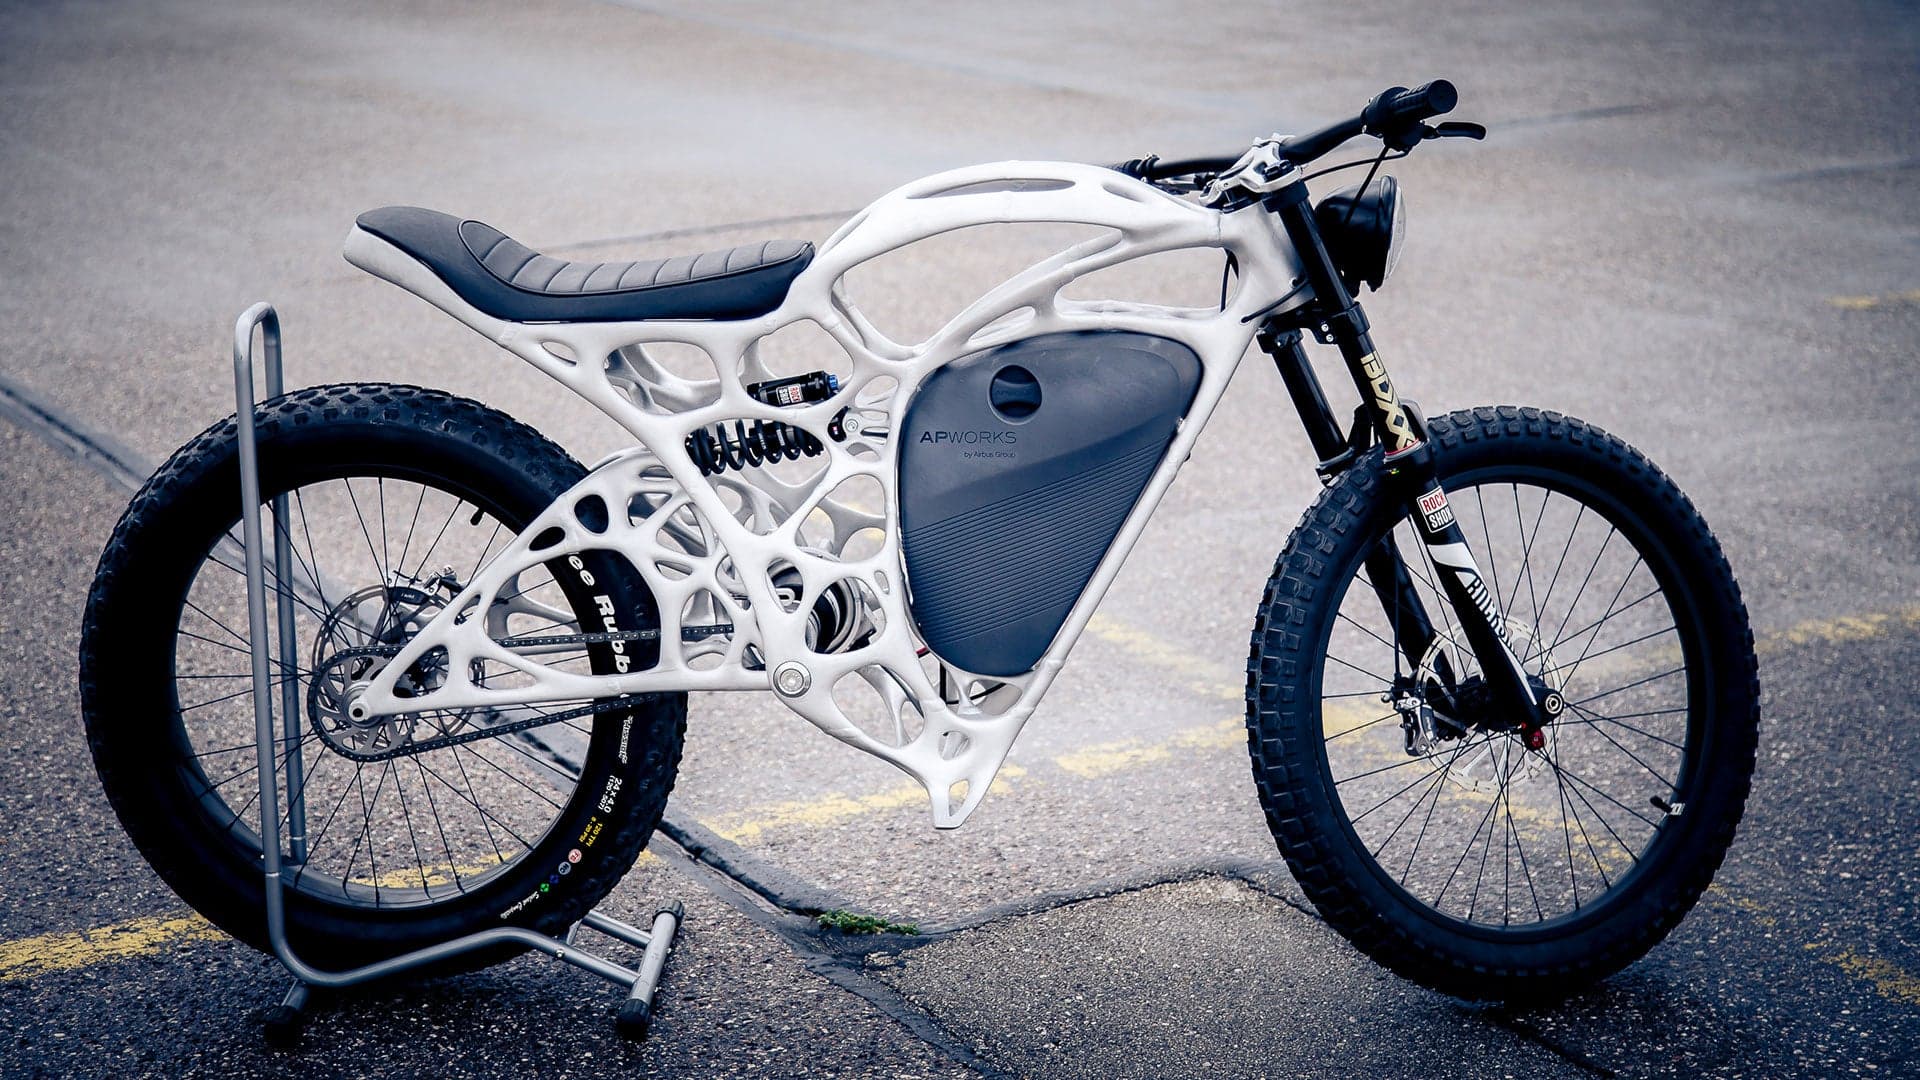 Airbus Subsidiary Shows Off the Light Rider, a 3D-Printed Electric Motorcycle